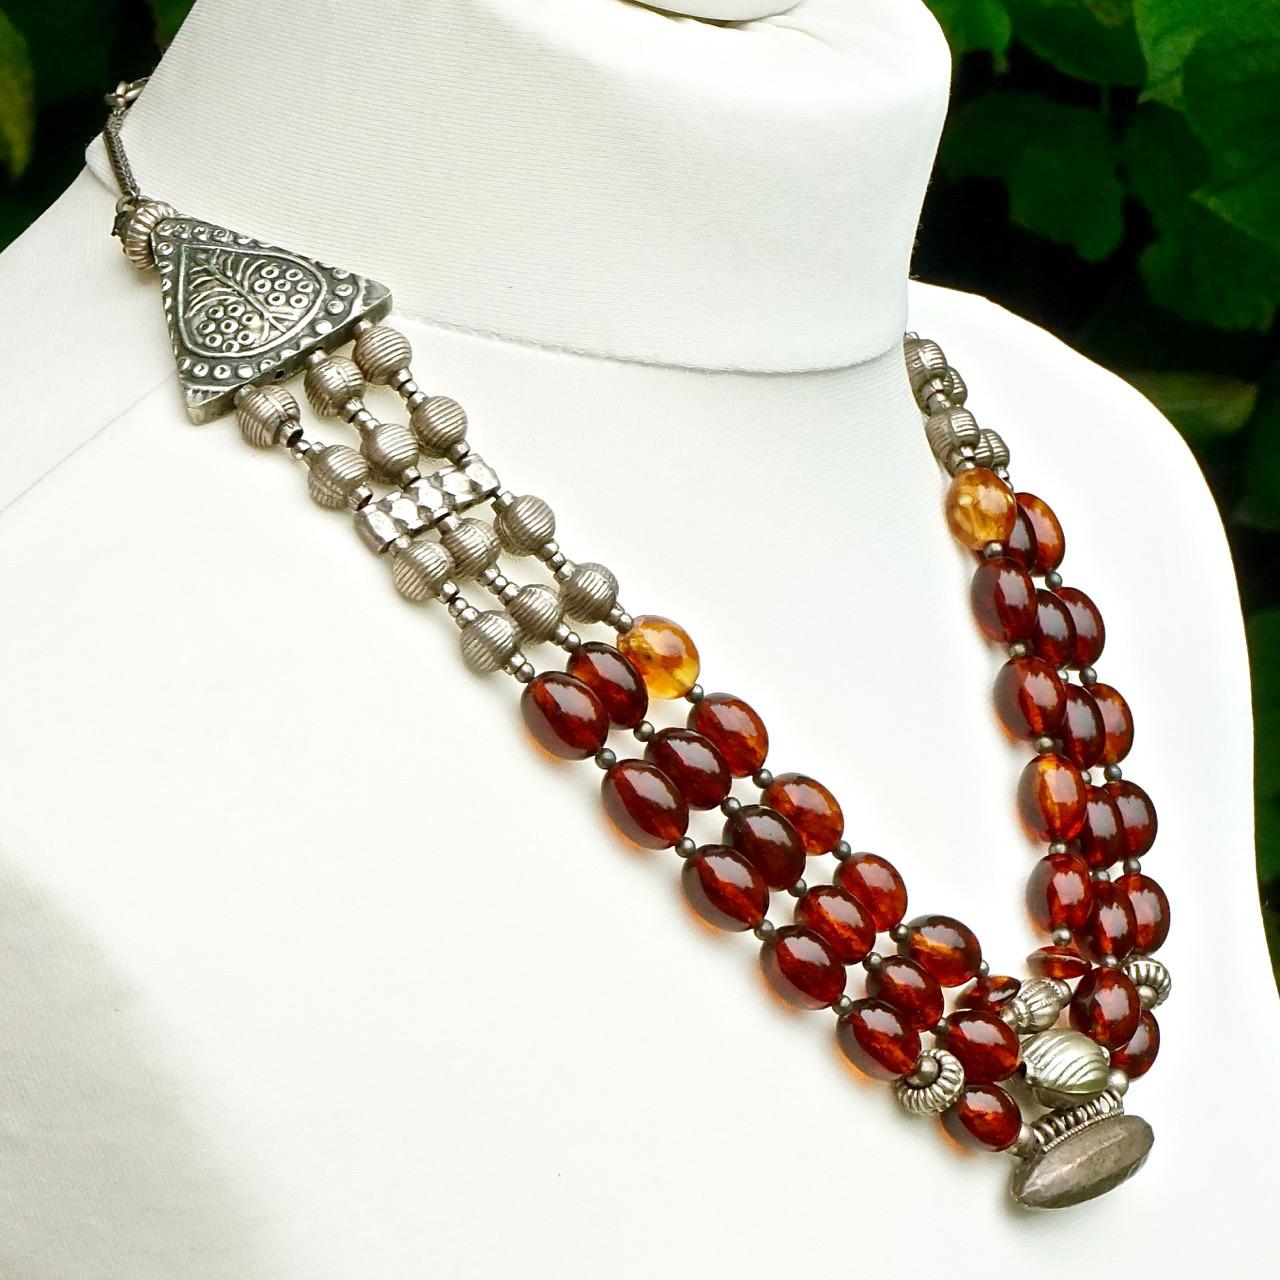 Hand Made Silver Tone and Triple Strand Polished Cognac Amber Bead Necklace For Sale 2